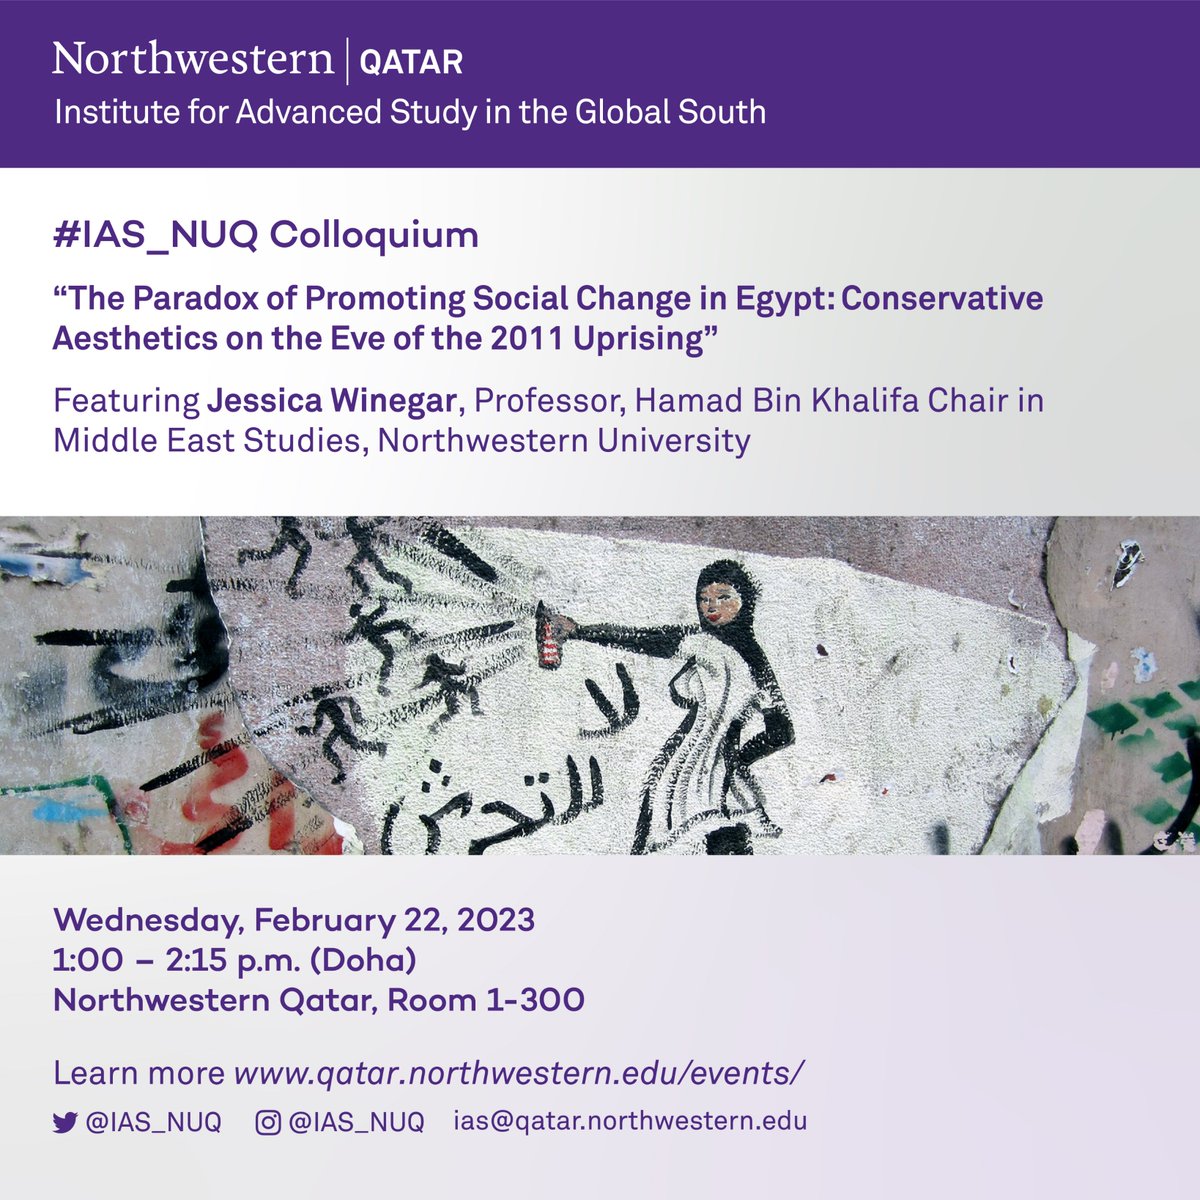 Please join us on Wednesday at @NUQatar for an #IAS_NUQ colloquium featuring @jessica_winegar of @MENAprogramNU discussing “The Paradox of Promoting Social Change in Egypt: Conservative Aesthetics on the Eve of the 2011 Uprising” bit.ly/40RovmD